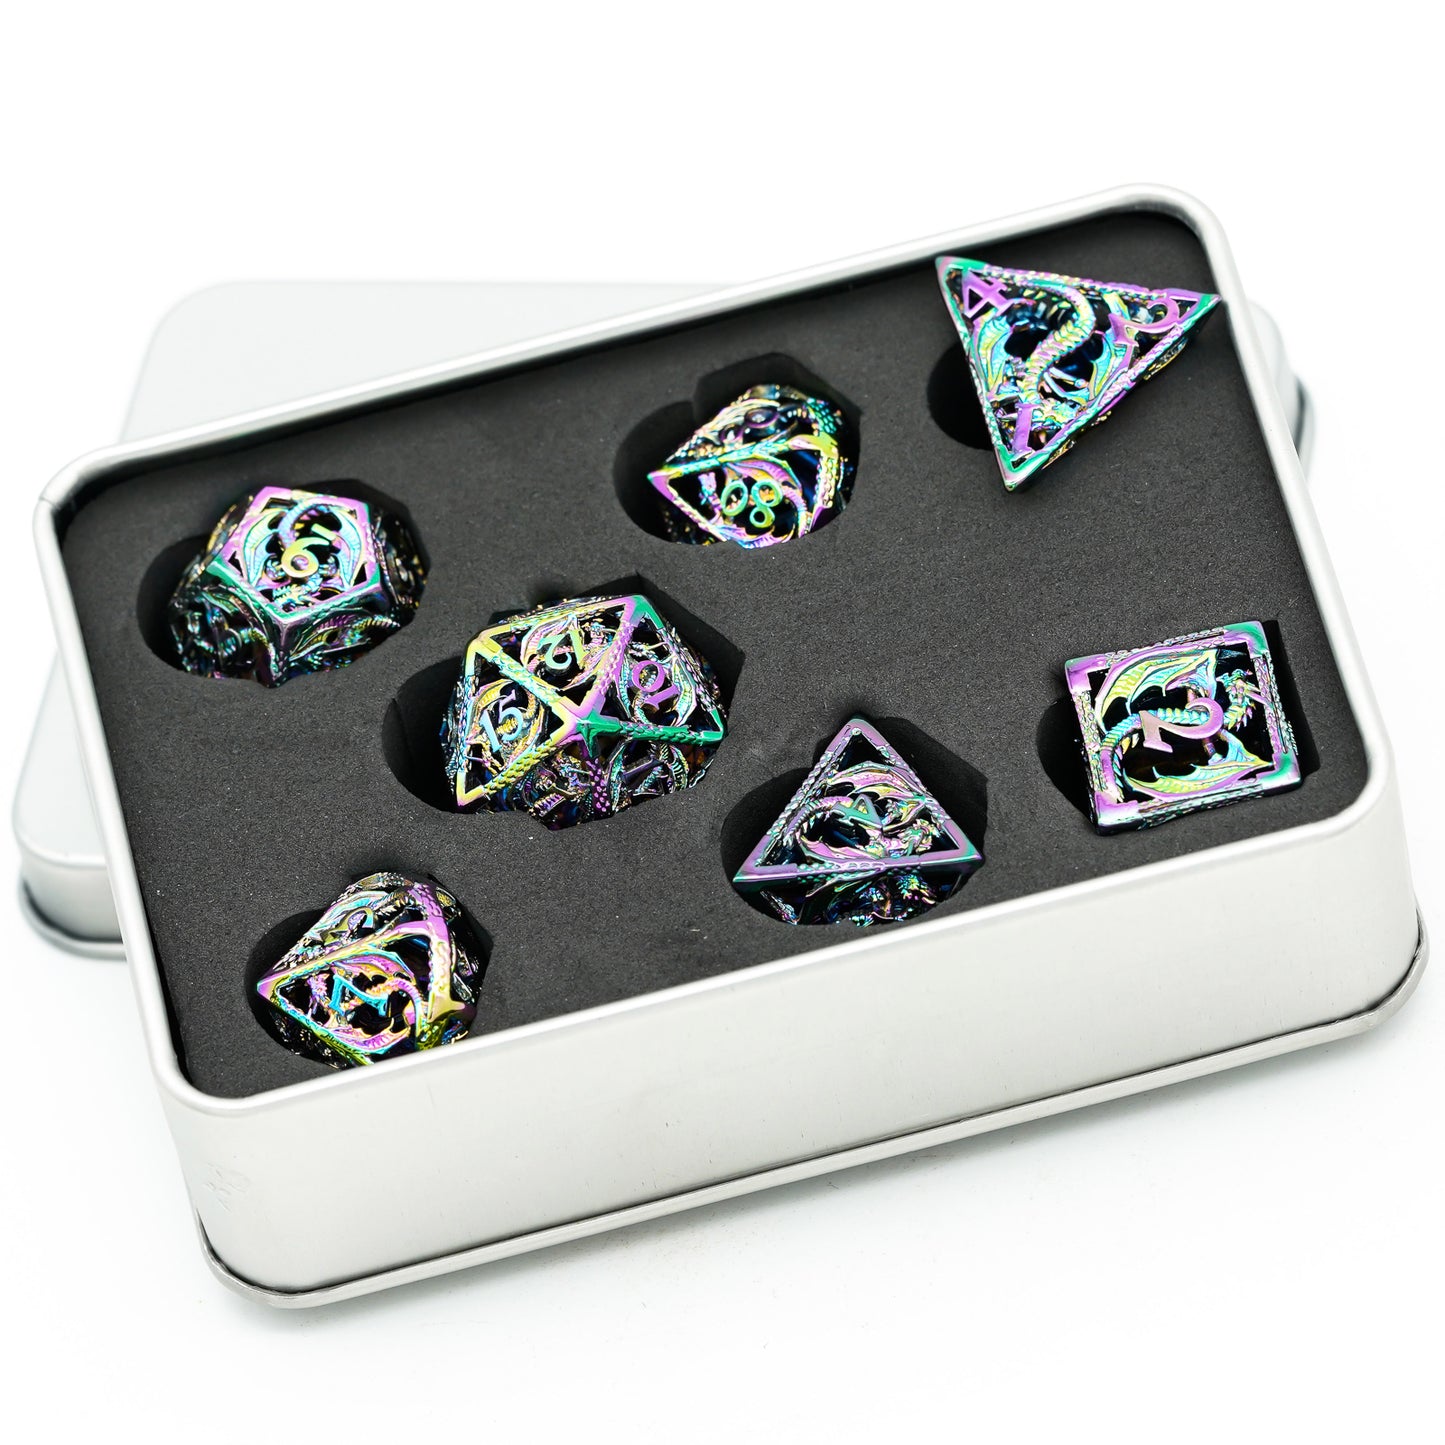 prismatic multicolored hollow metal dice dragon set in carrying case